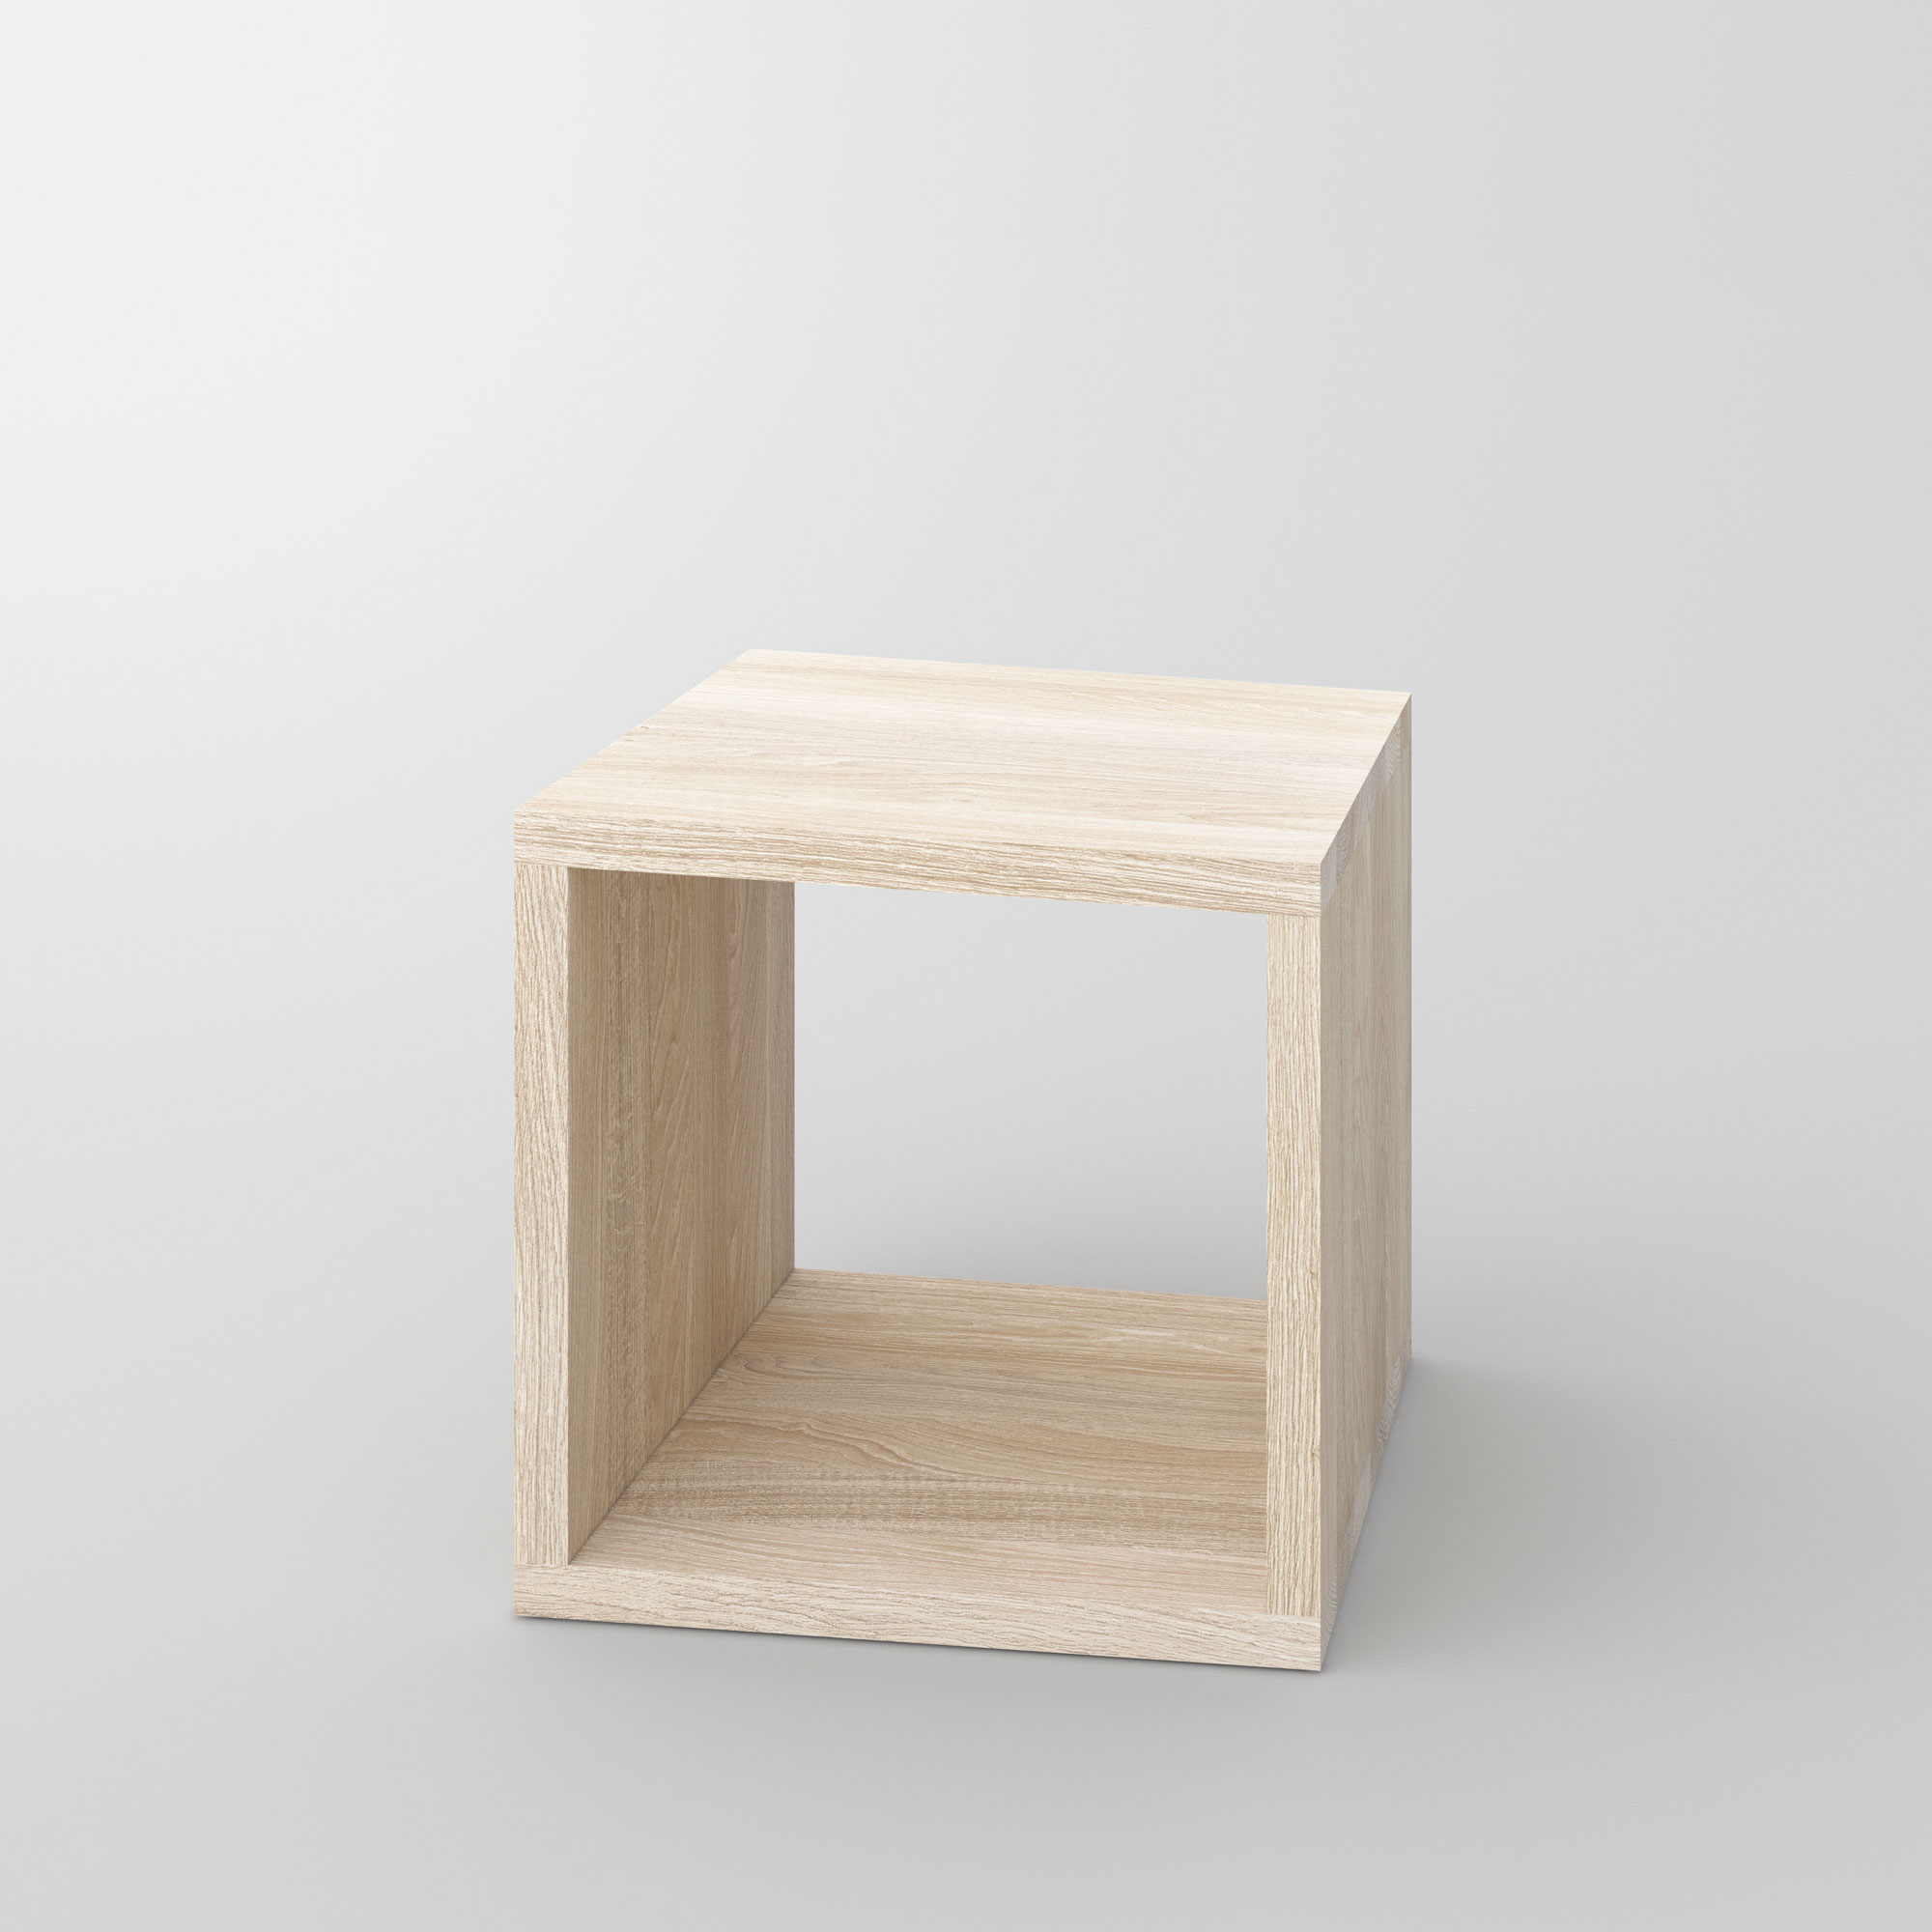 Multifunctional Wooden Stool MENA B 3 custom made in solid wood by vitamin design